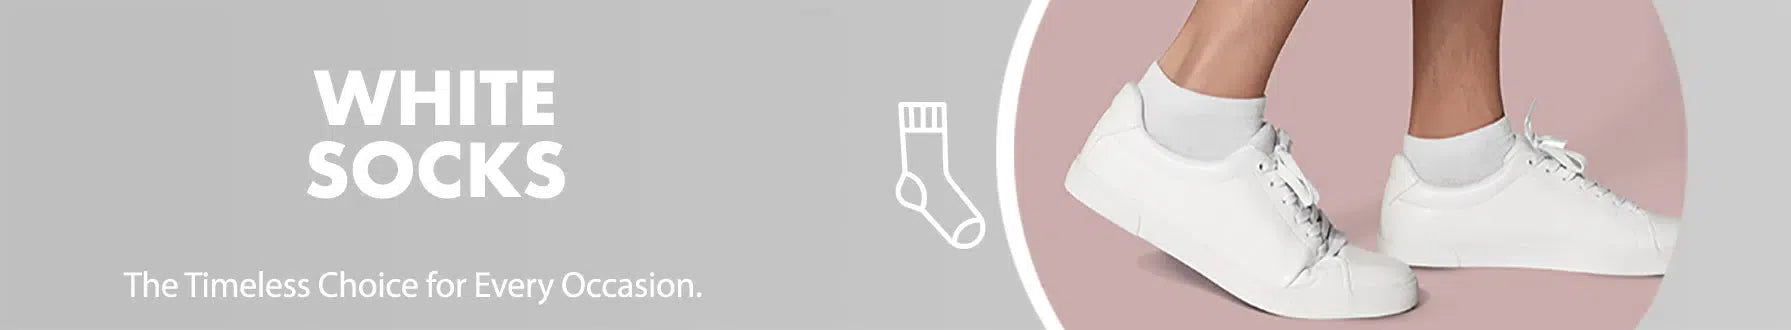 GoWith white socks collection banner desktop